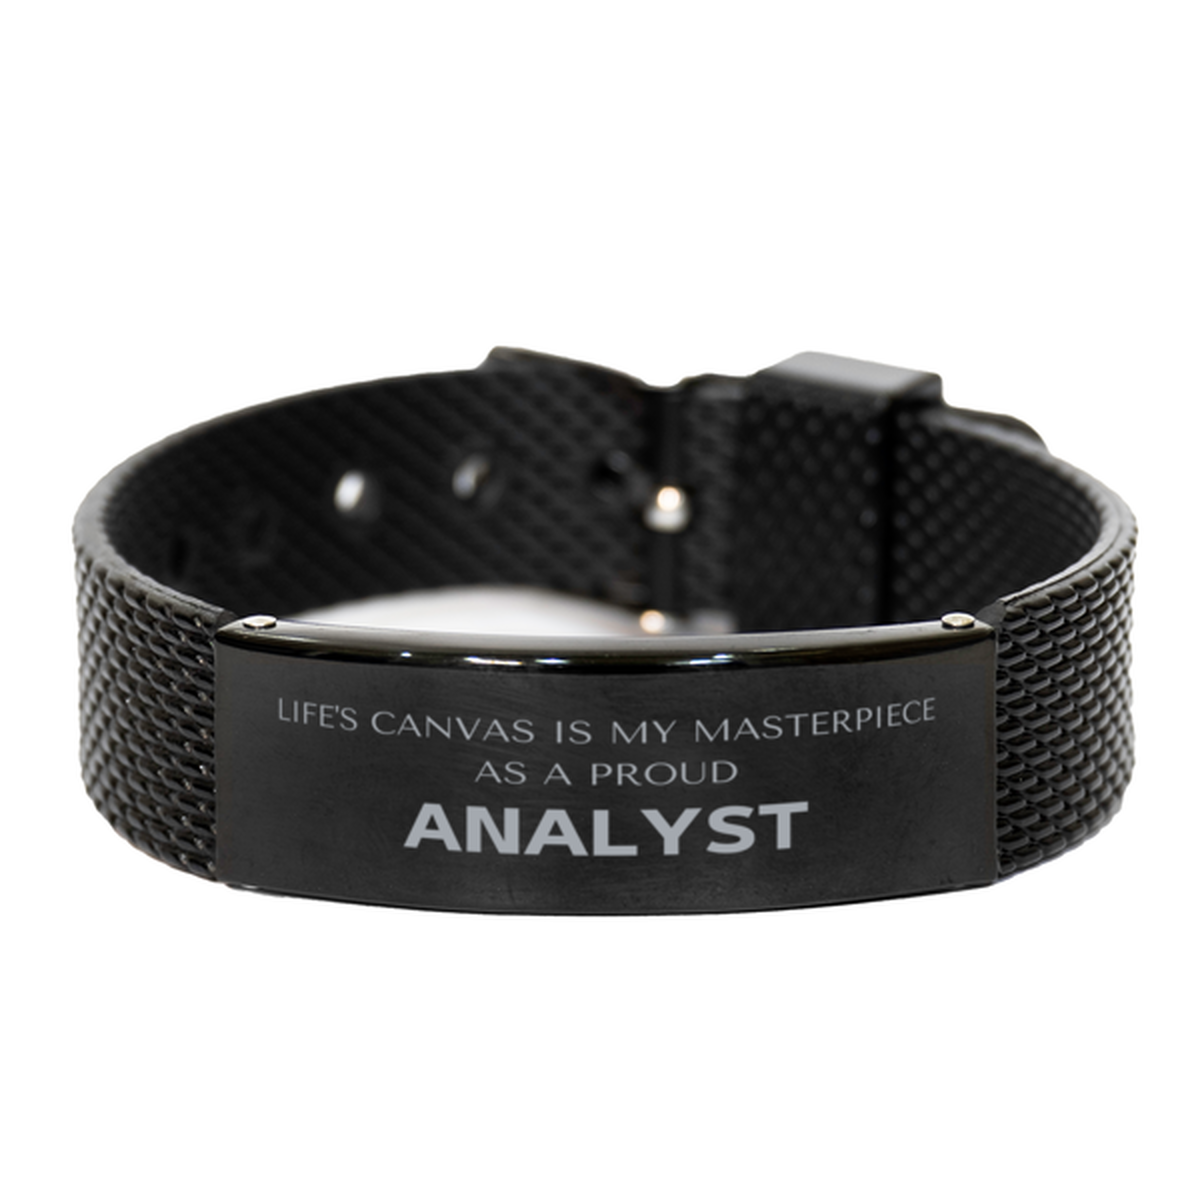 Proud Analyst Gifts, Life's canvas is my masterpiece, Epic Birthday Christmas Unique Black Shark Mesh Bracelet For Analyst, Coworkers, Men, Women, Friends